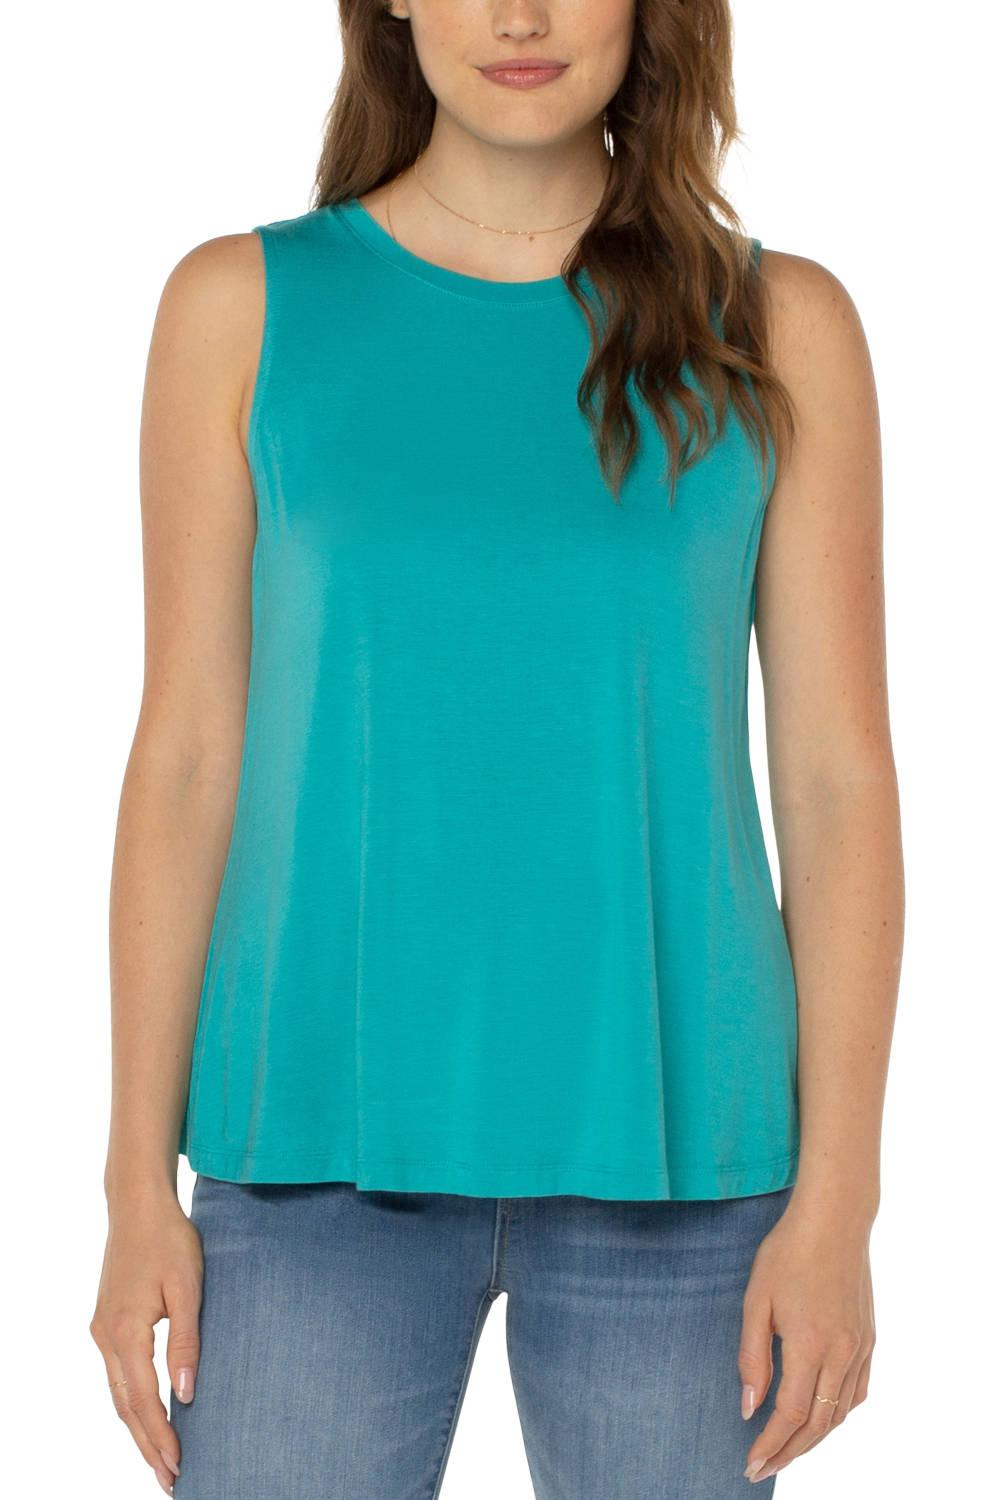 Baltic Blue Scoop Neck Tank - Strawberry Moon Boutique